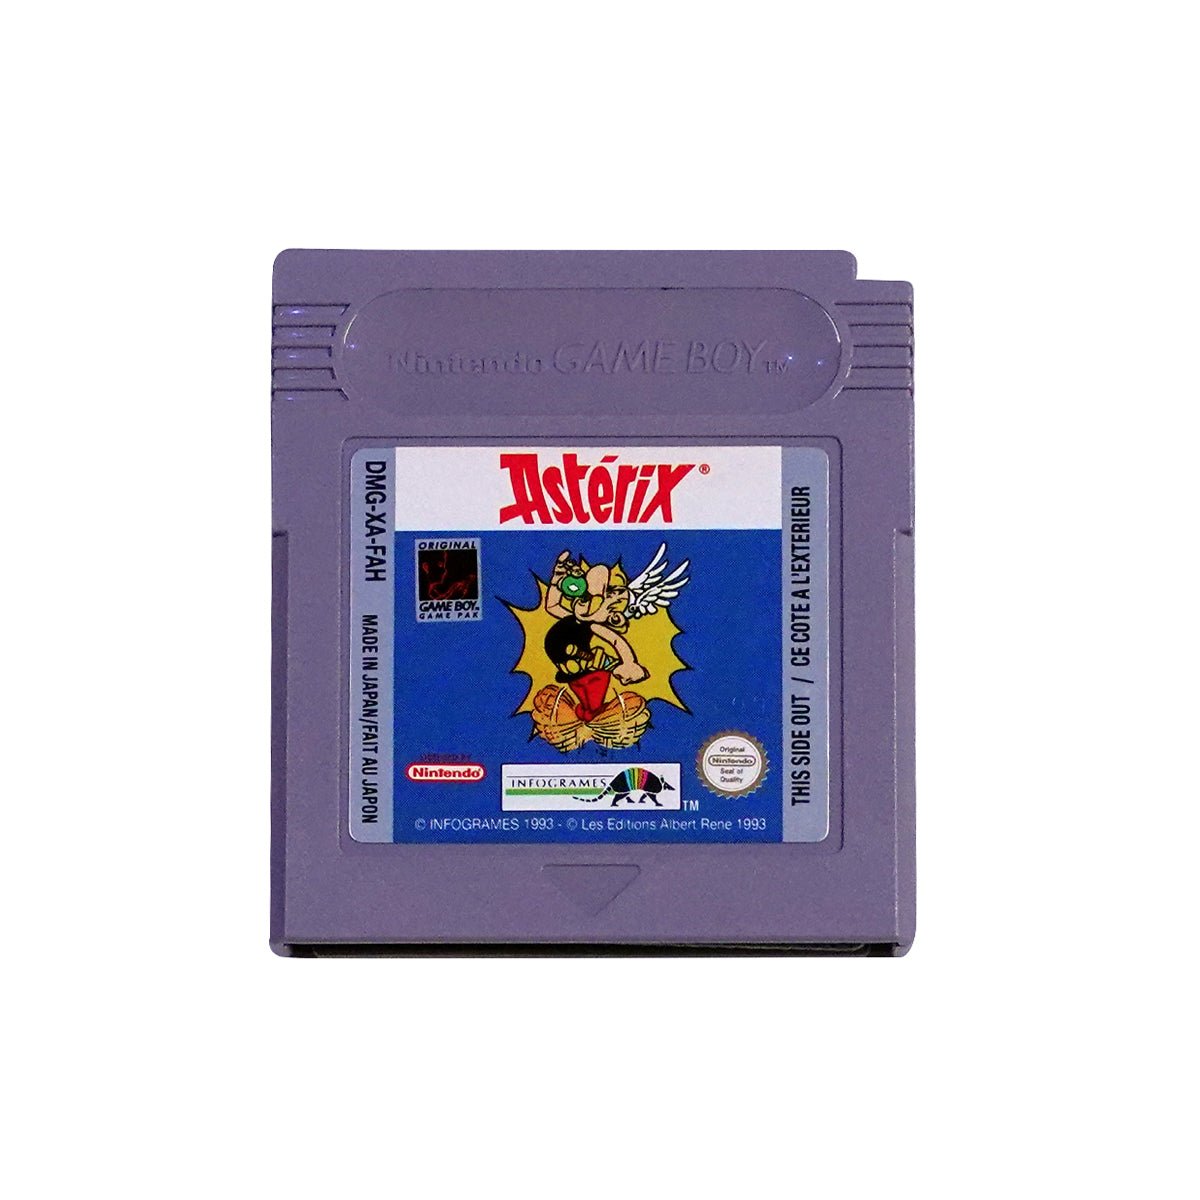 (Pre-Owned) Asterix - Gameboy Classic Game - ريترو - Store 974 | ستور ٩٧٤